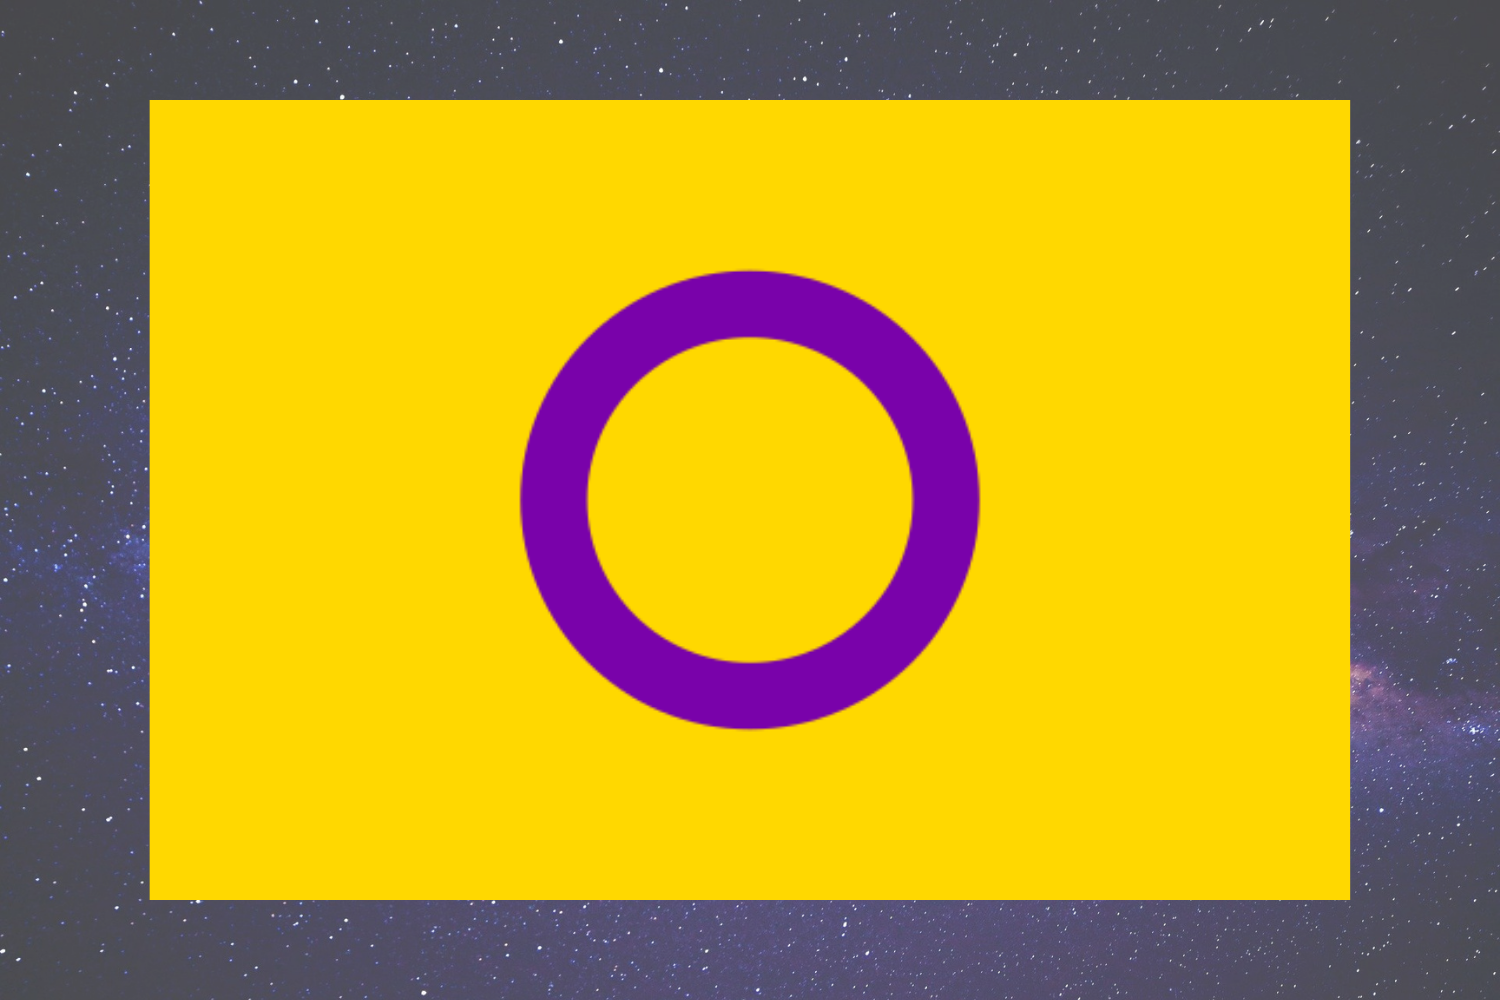 The Intersex Flag - A bright yellow flag with a hollow purple circle in the middle. The colors were chosen to contrast against the binary pink and blue, with the purple circle representing wholeness, completeness, and the ability to be who and how they want to be.